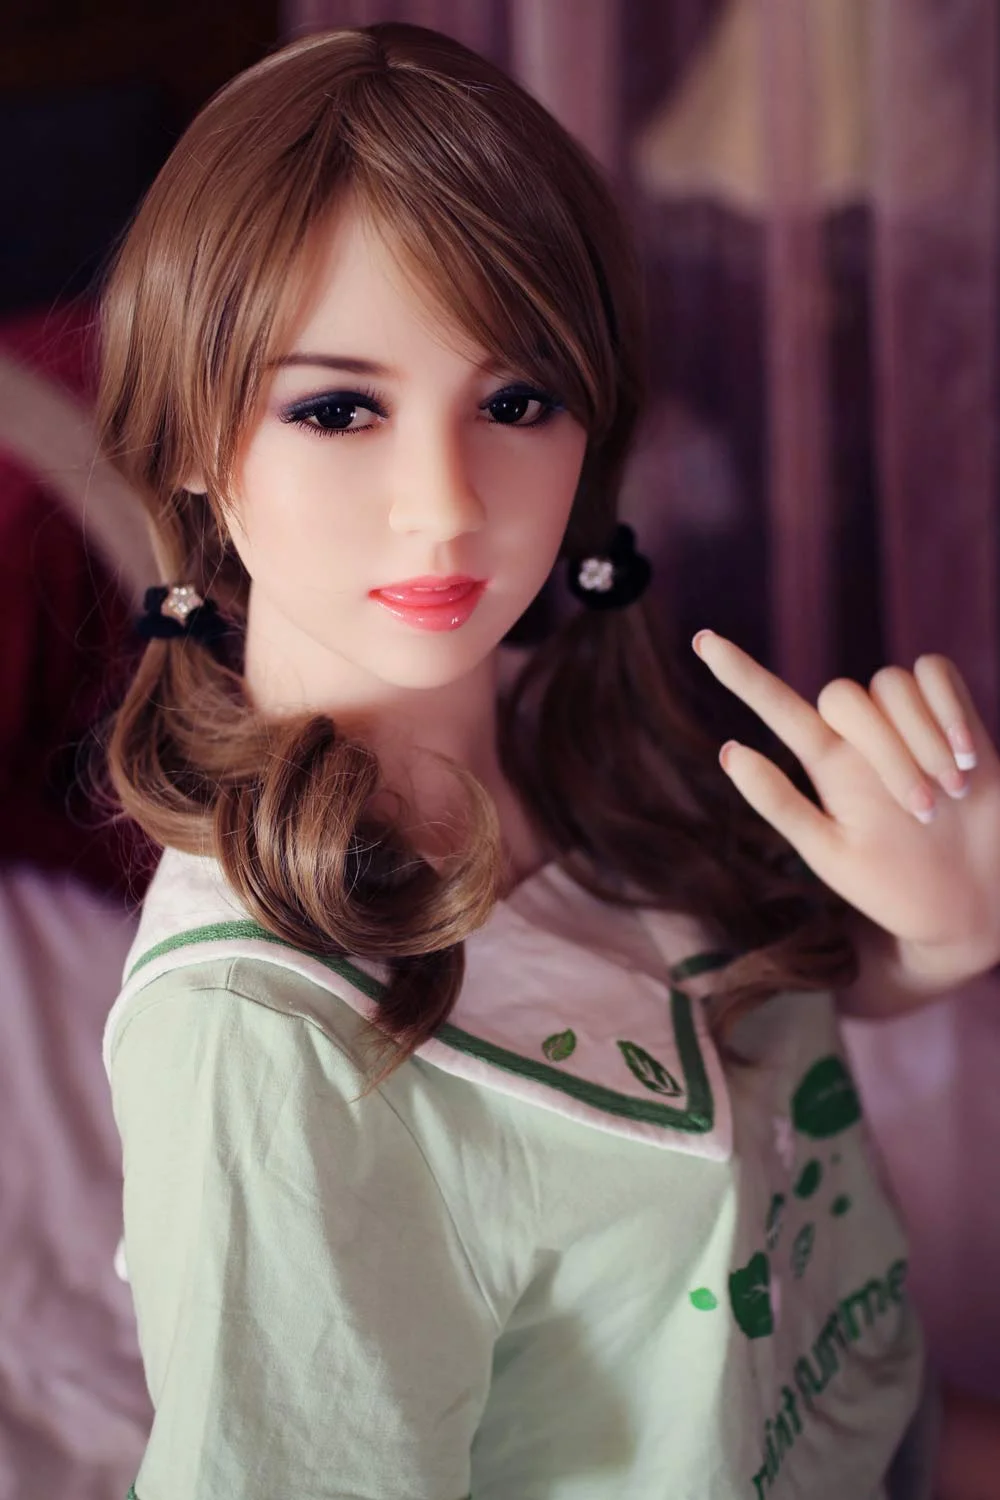 Sex doll with outstretched finger